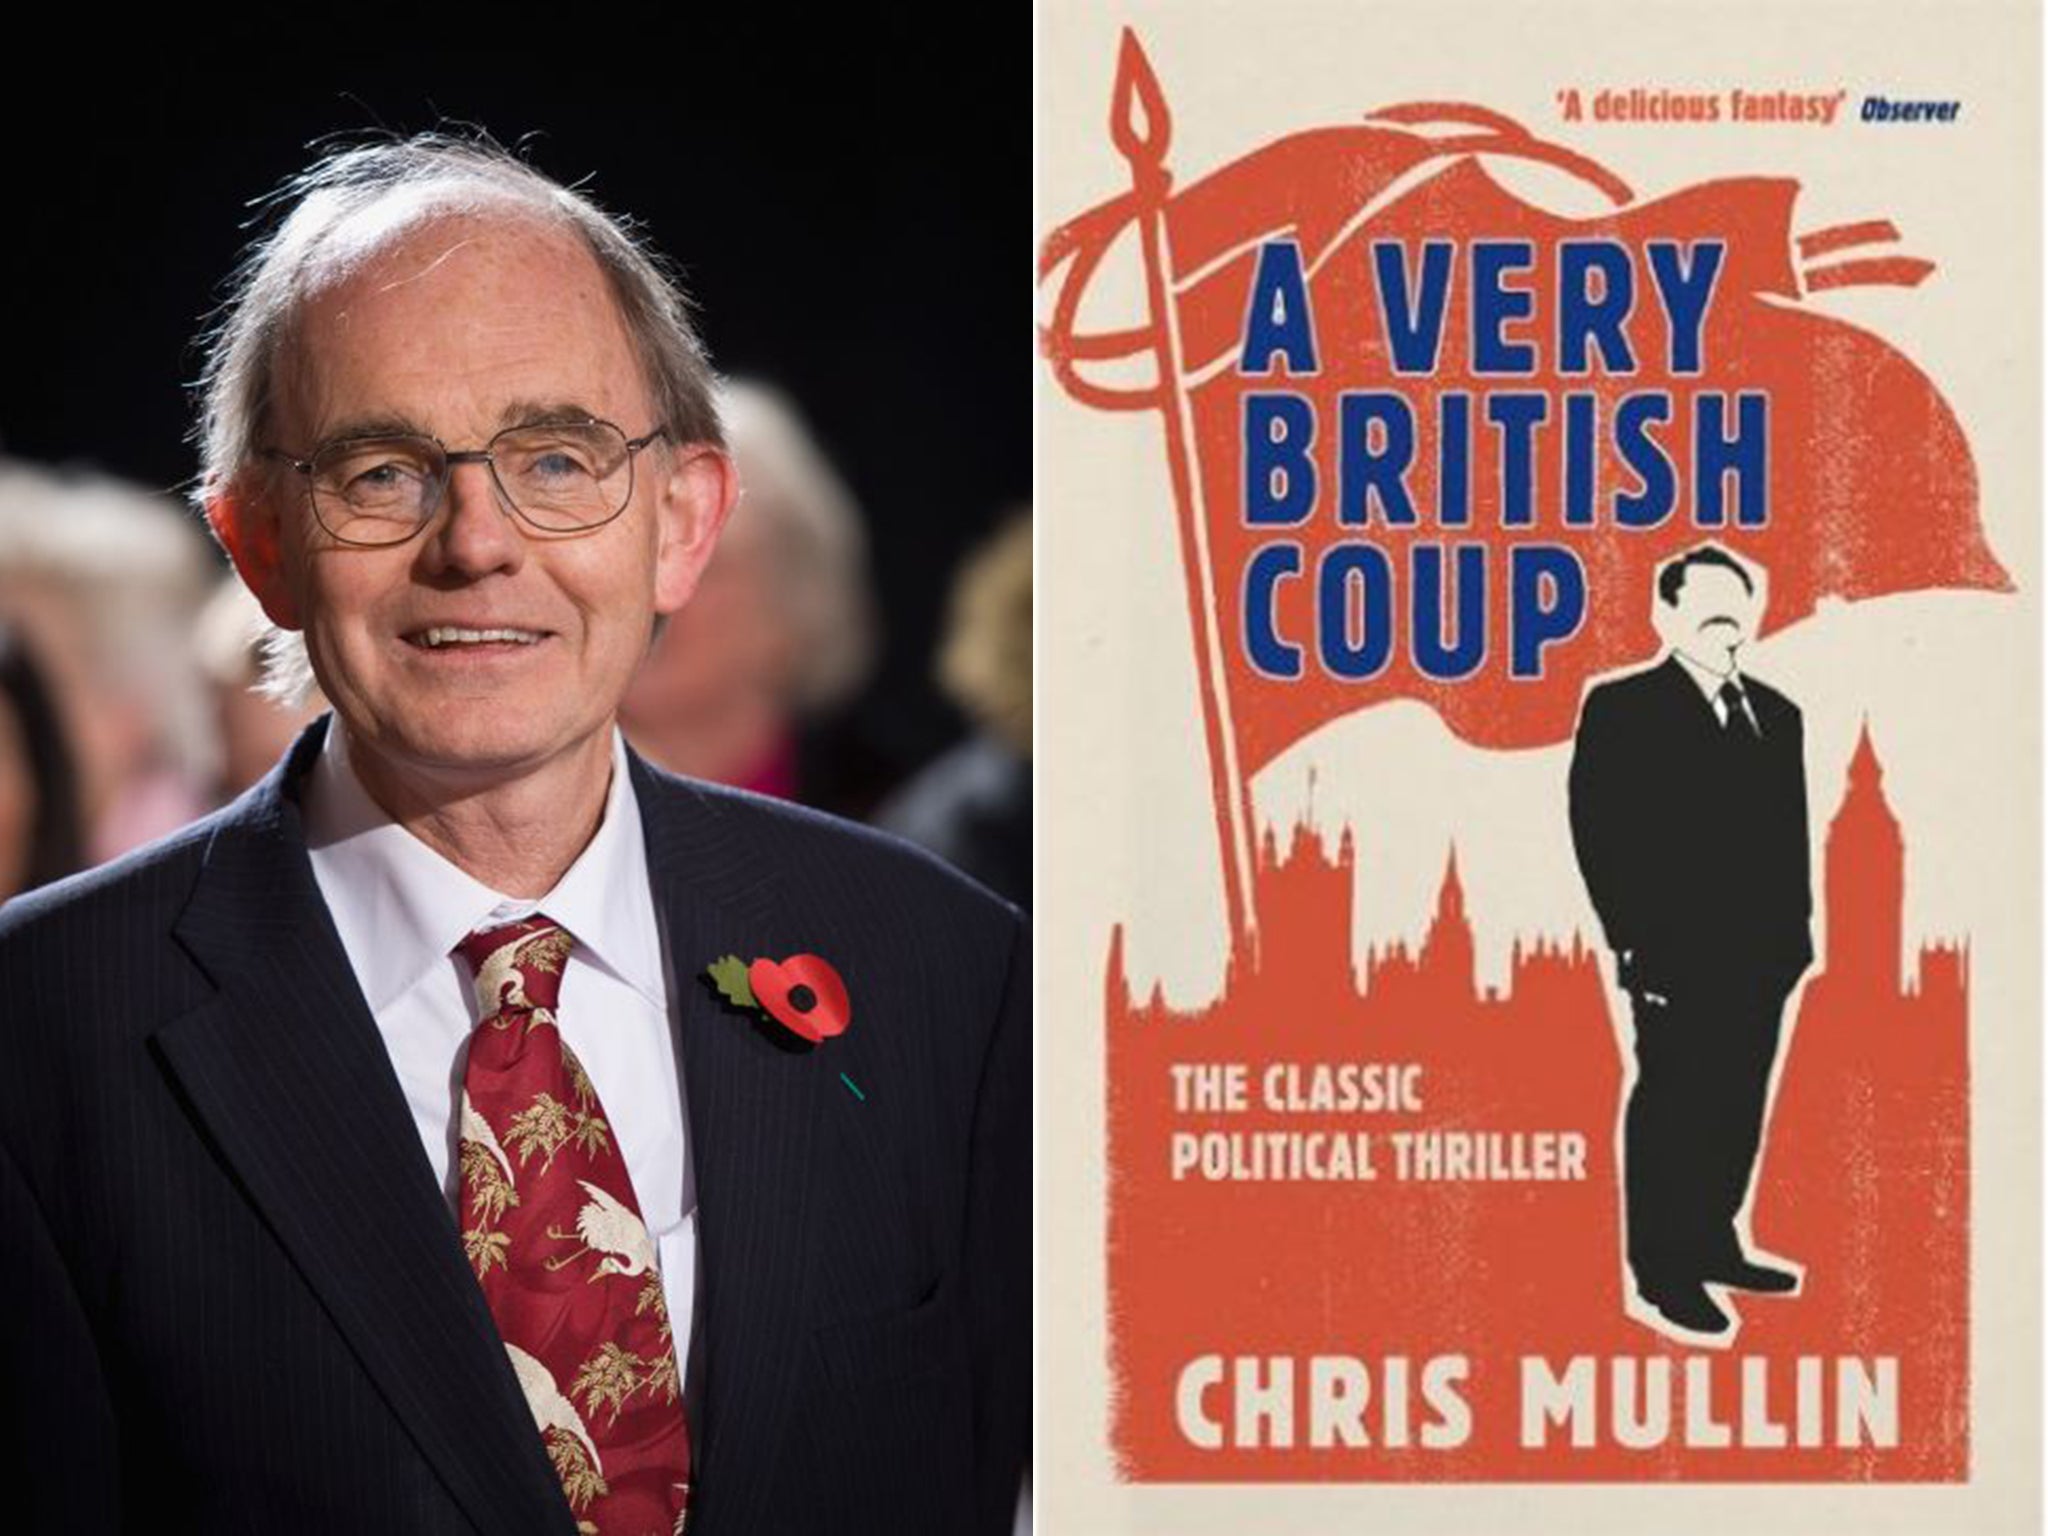 Chris Mullin and his prescient 1982 political thriller, 'A Very British Coup'